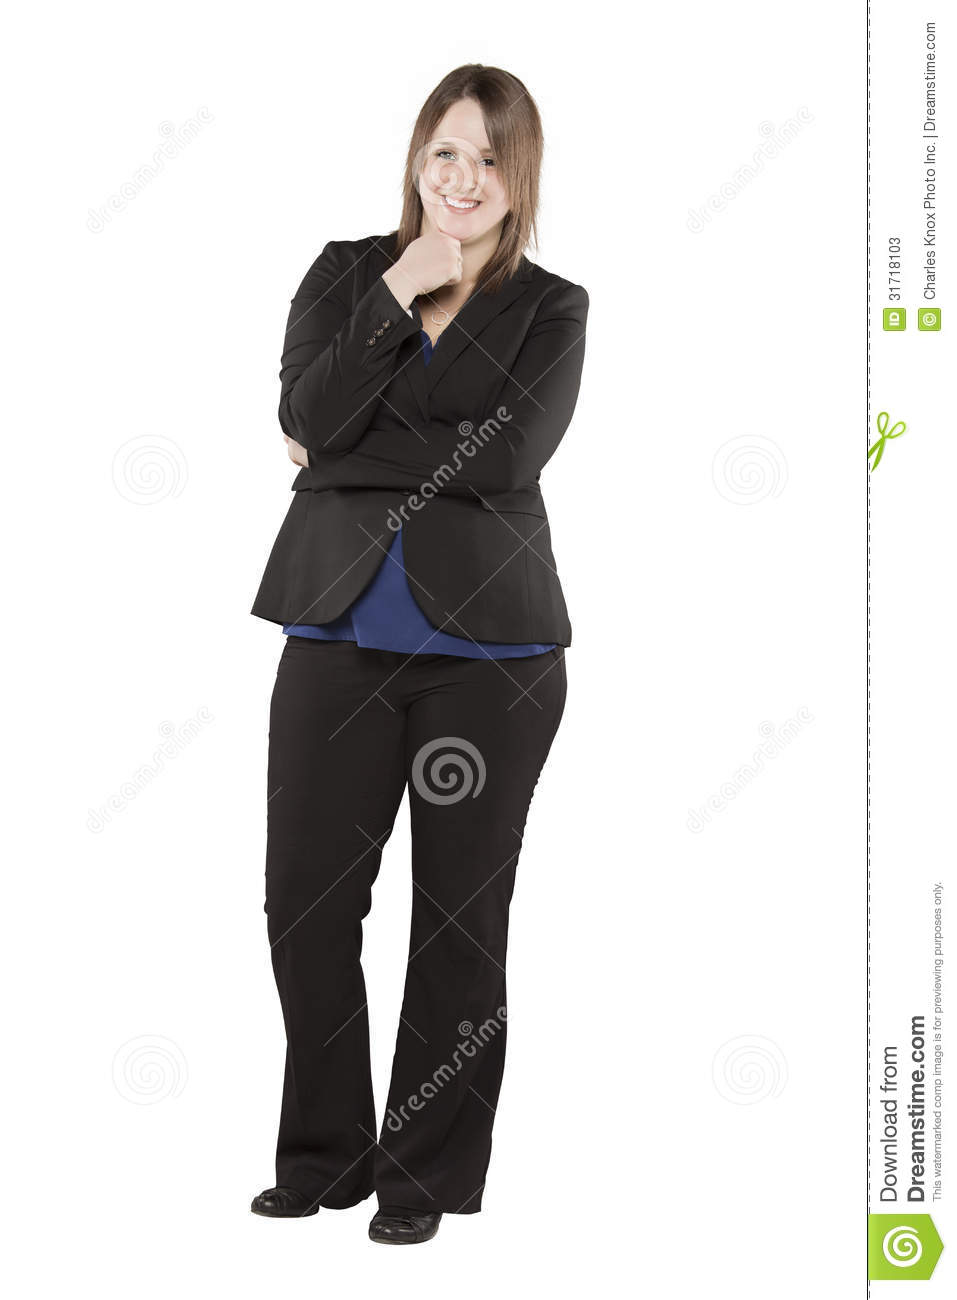 Young Woman In Professional Attire Stock Photos   Image  31718103